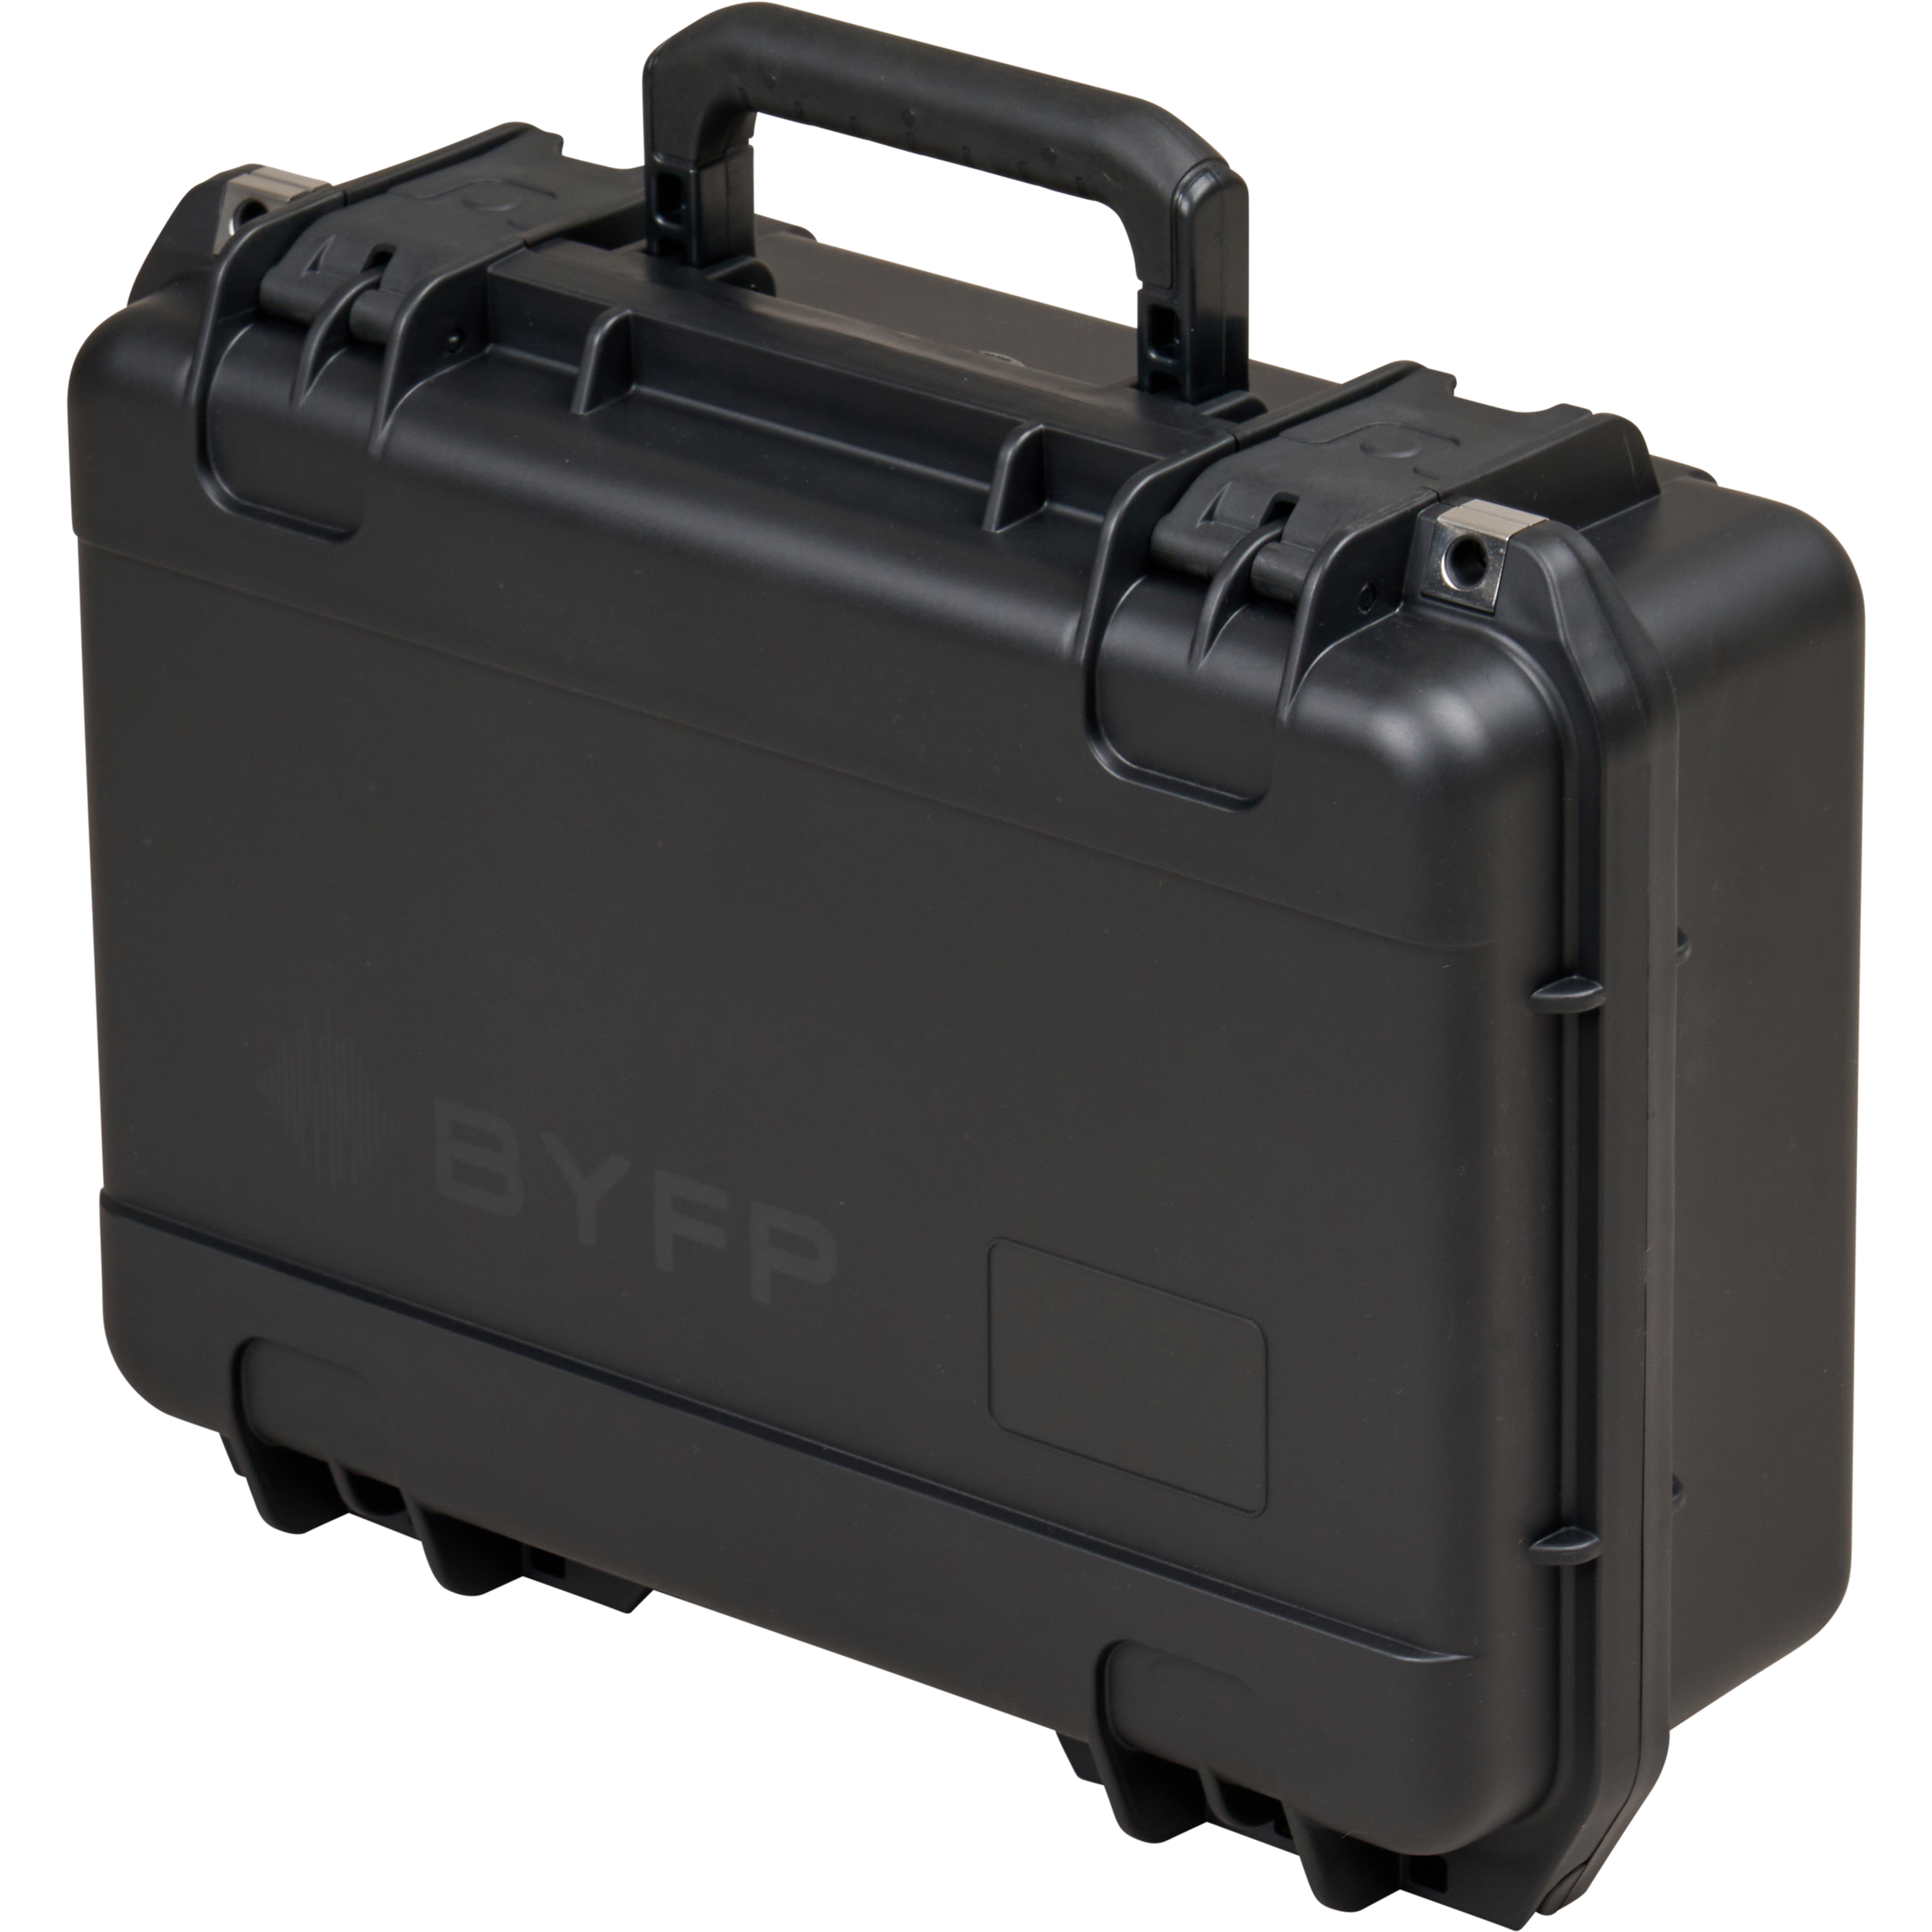 BYFP ipCase for Roland V-60HD